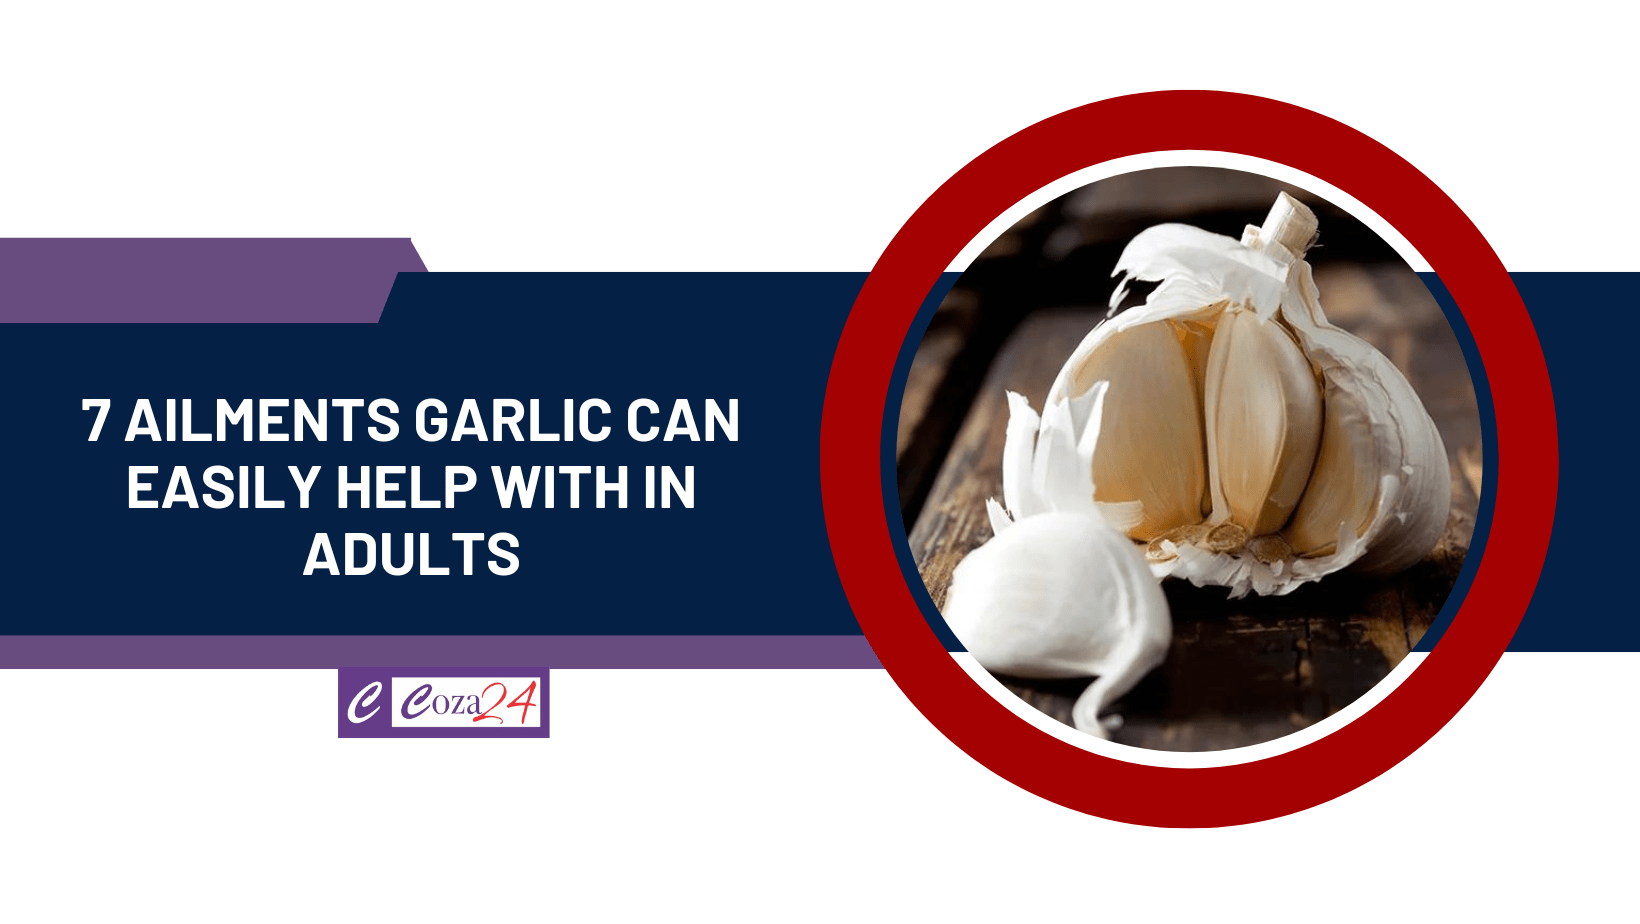 7 Ailments Garlic Can Easily Help With In Adults